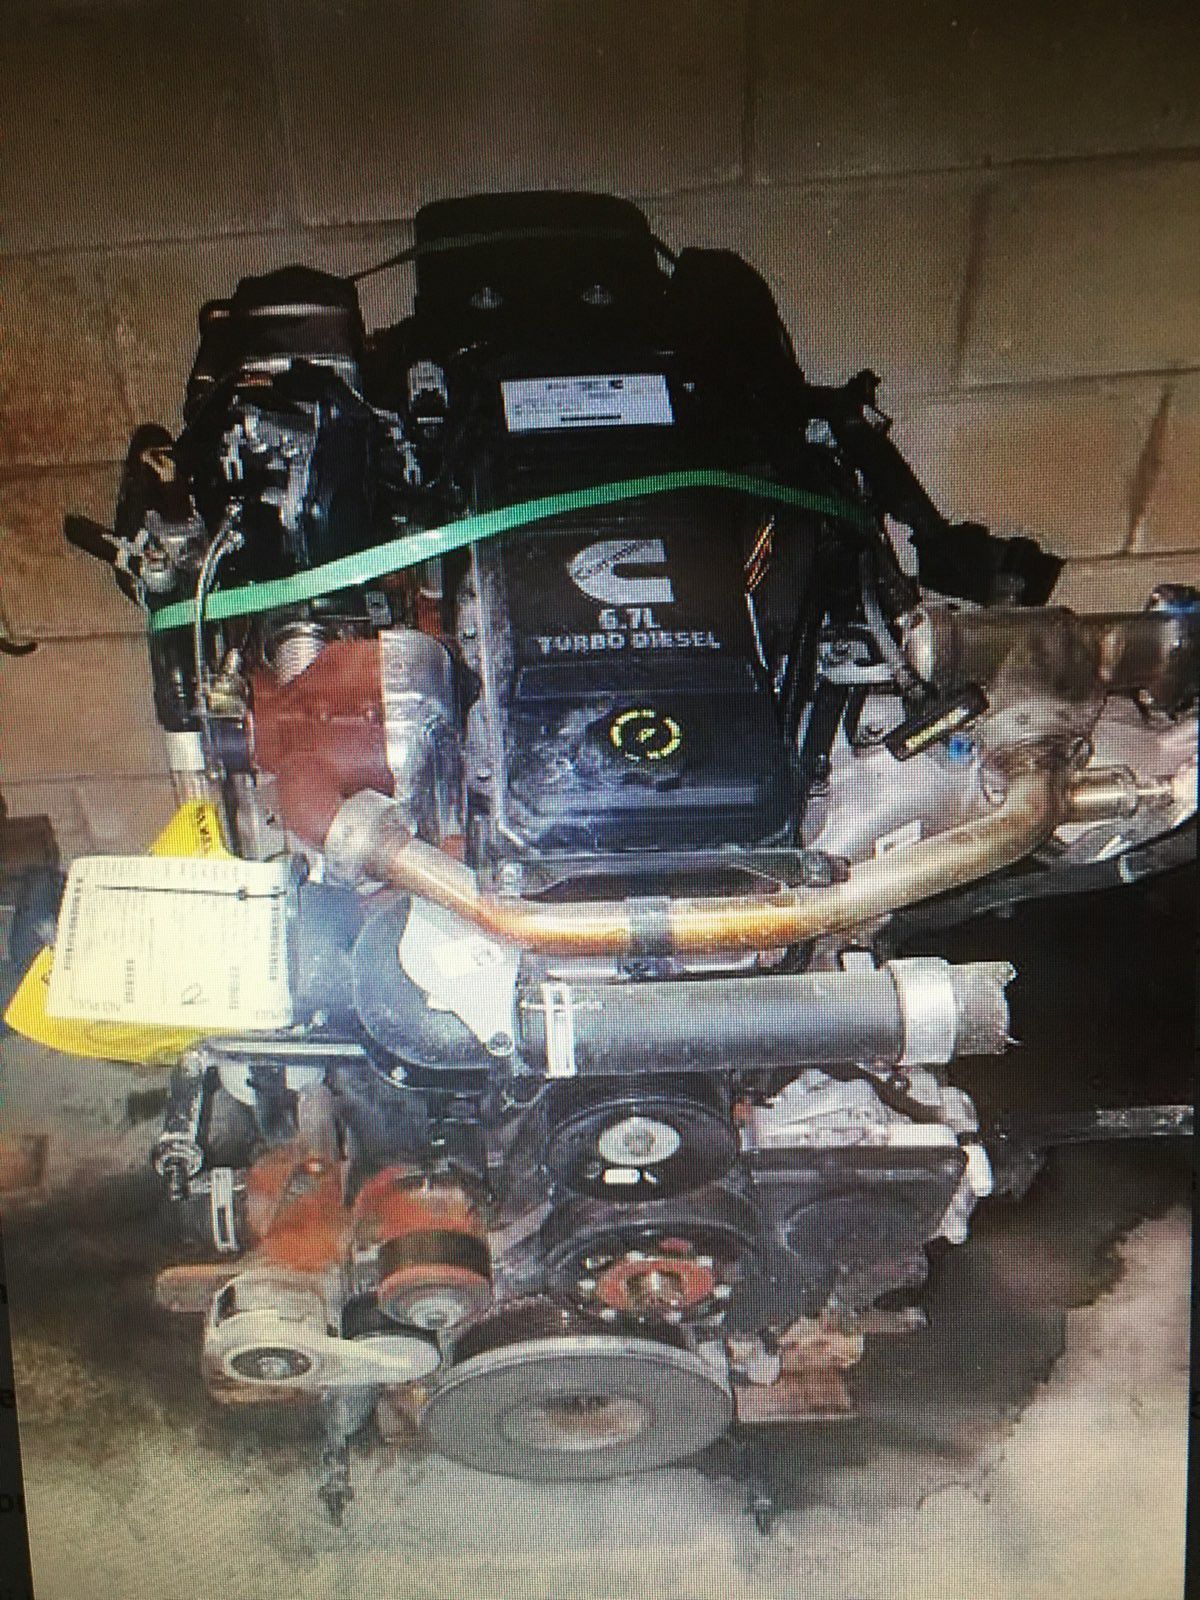 2018 6.7 cummins motor 18,000 miles complete motor ready to install